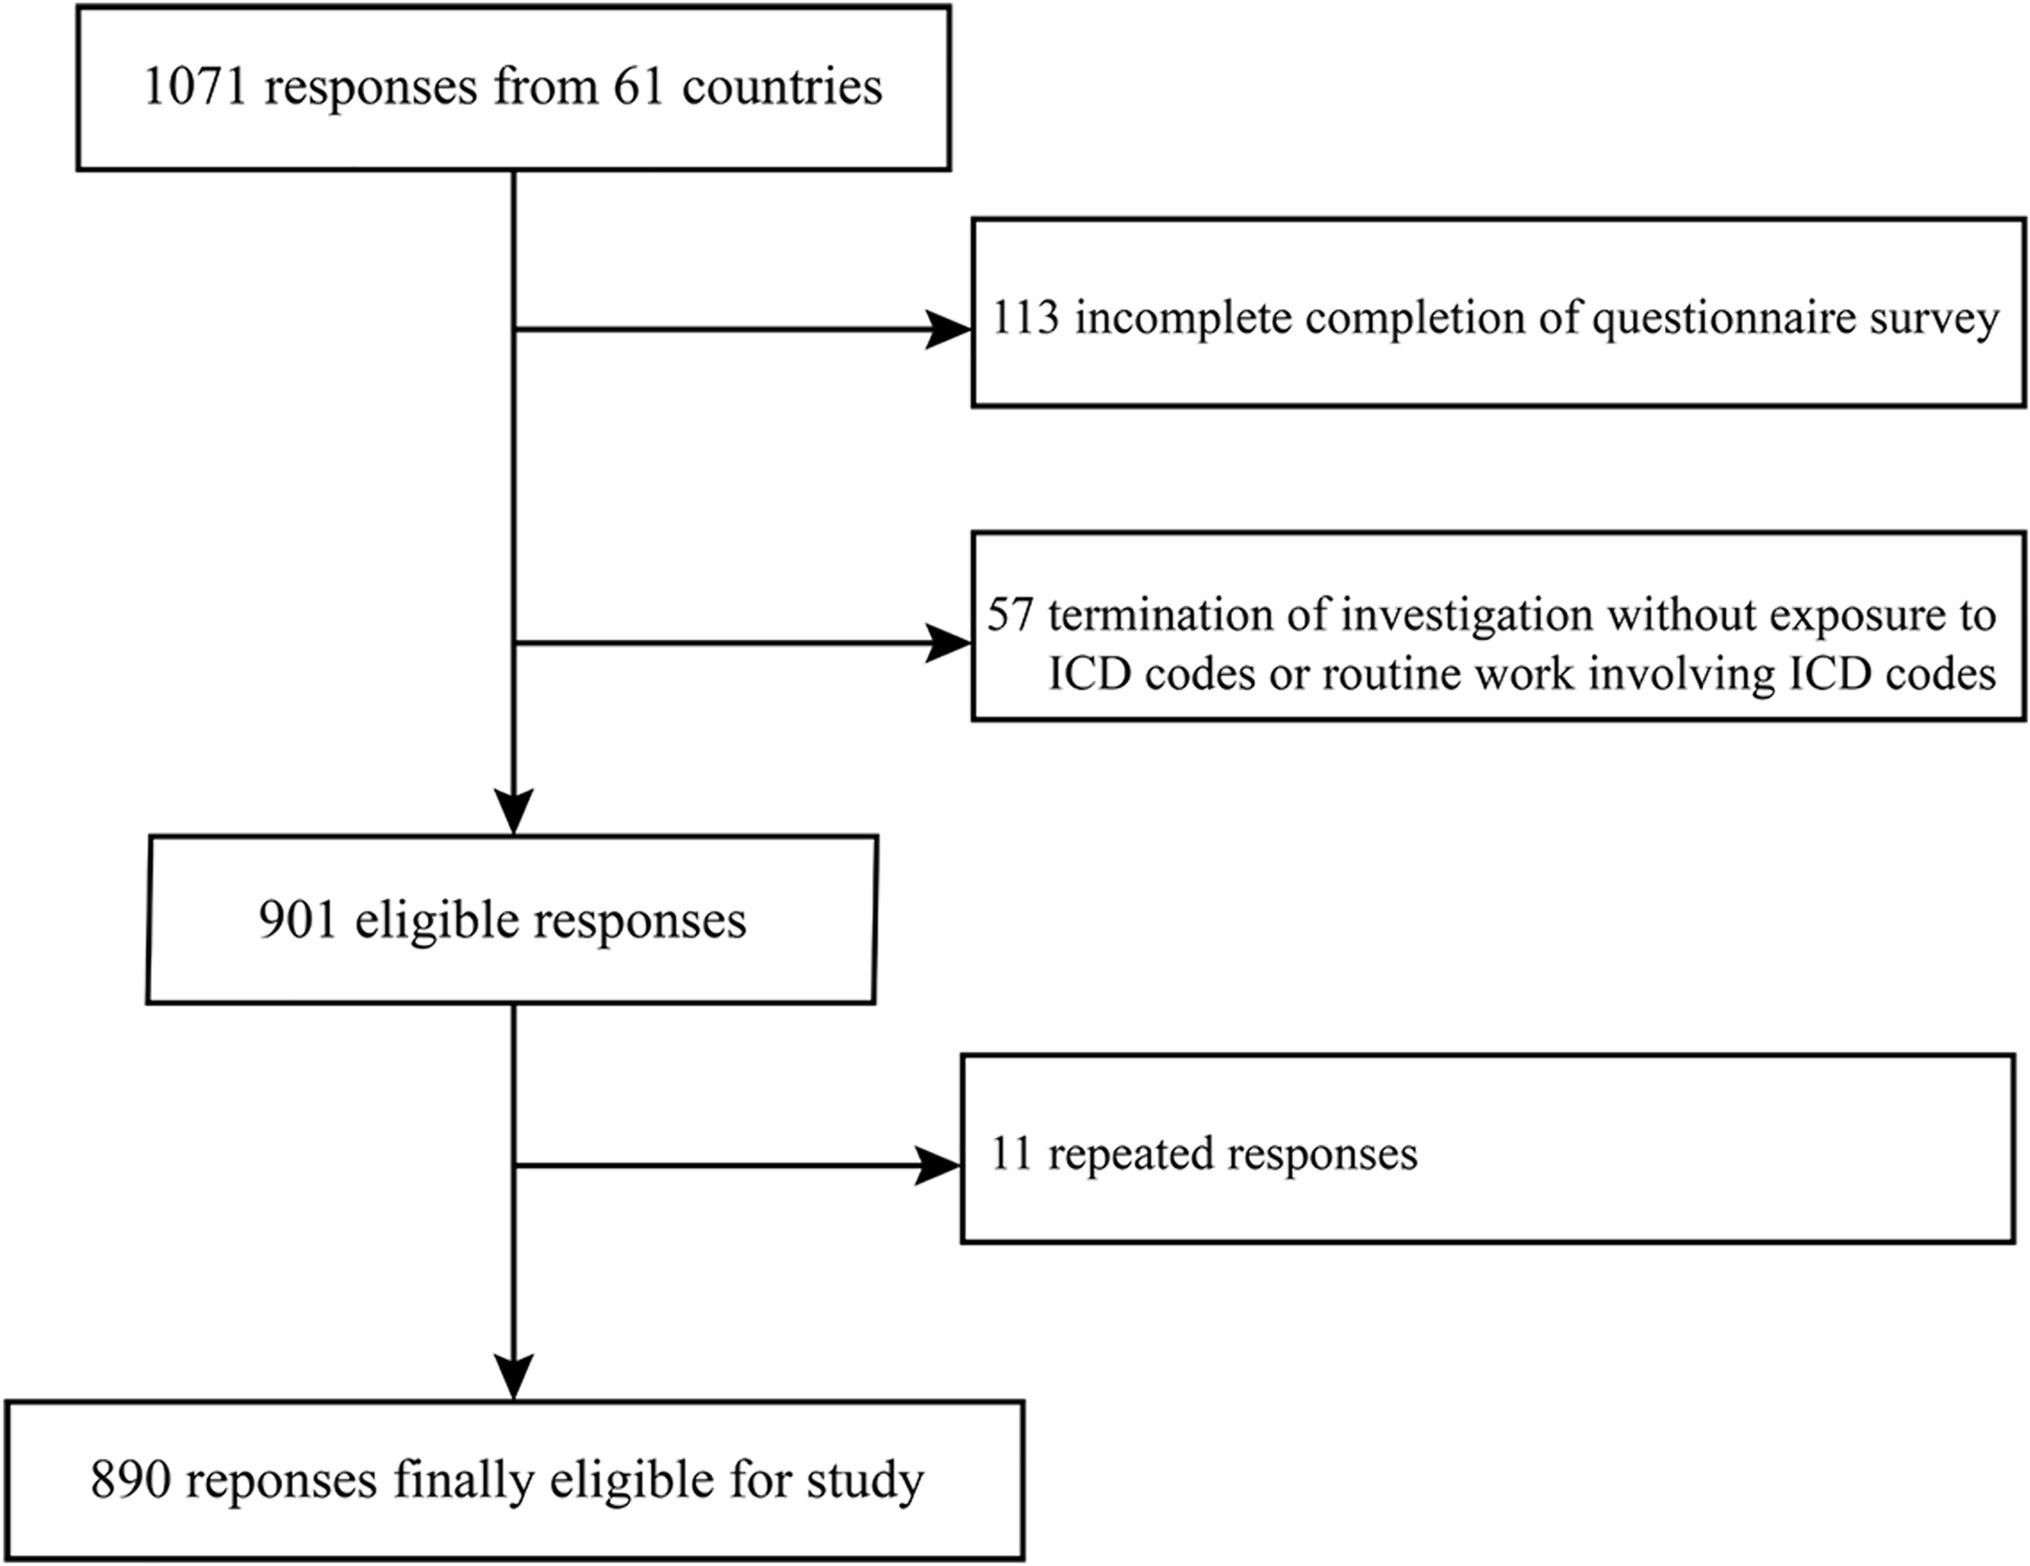 A global survey on the use of the international classification of diseases codes for metabolic dysfunction-associated fatty liver disease